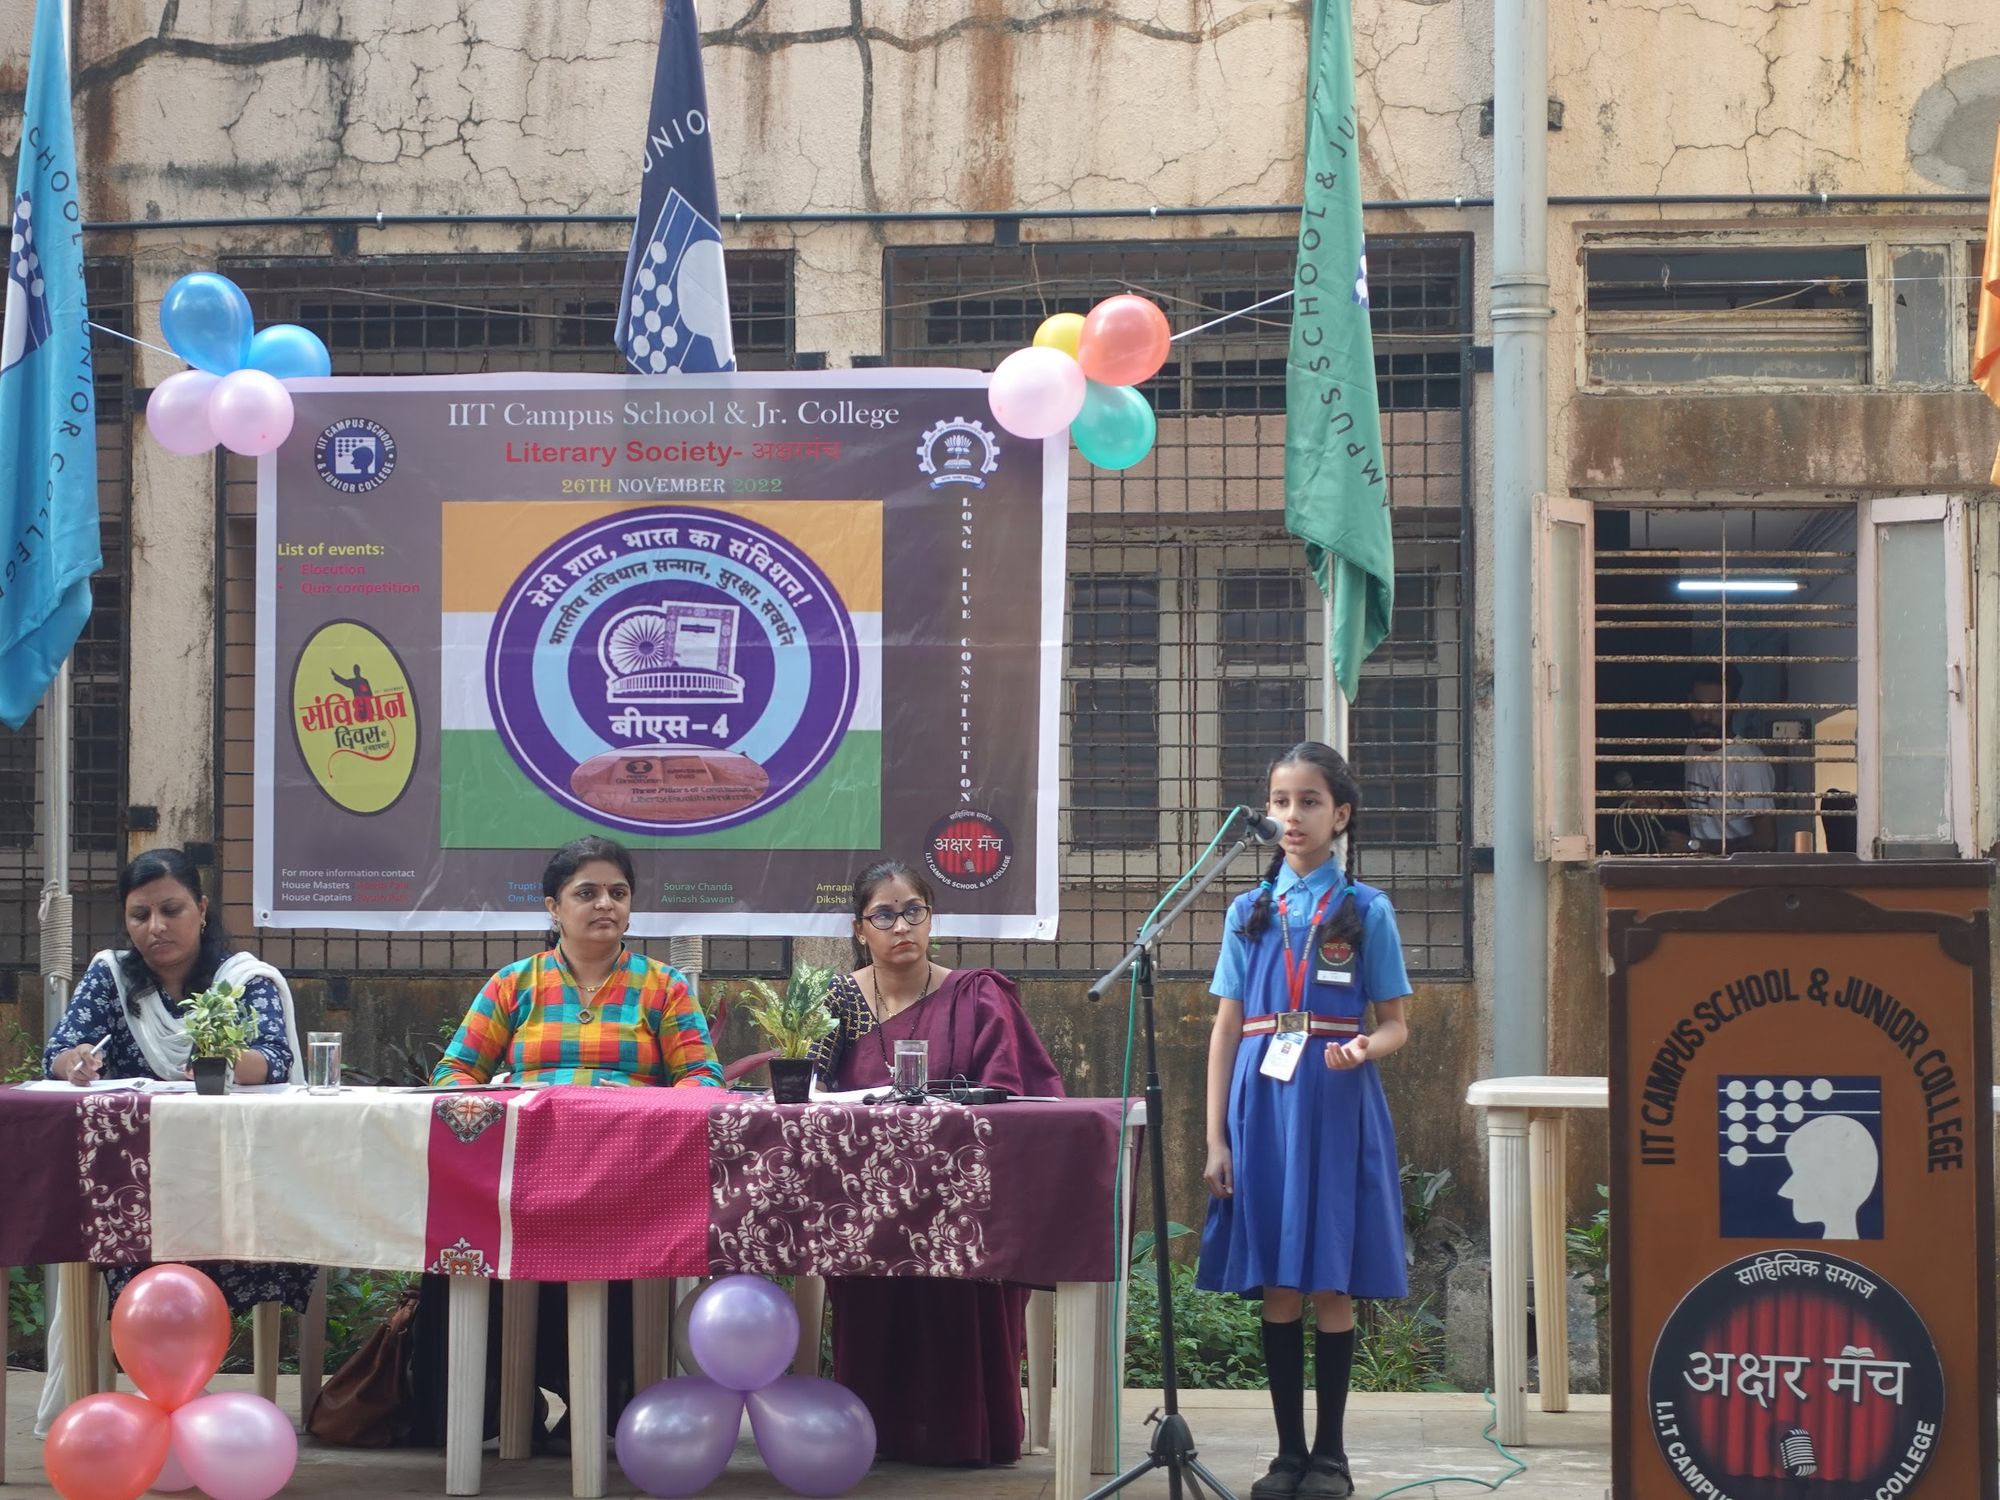 IIT Bombay Campus School celebrates the 73rd National Indian constitution day